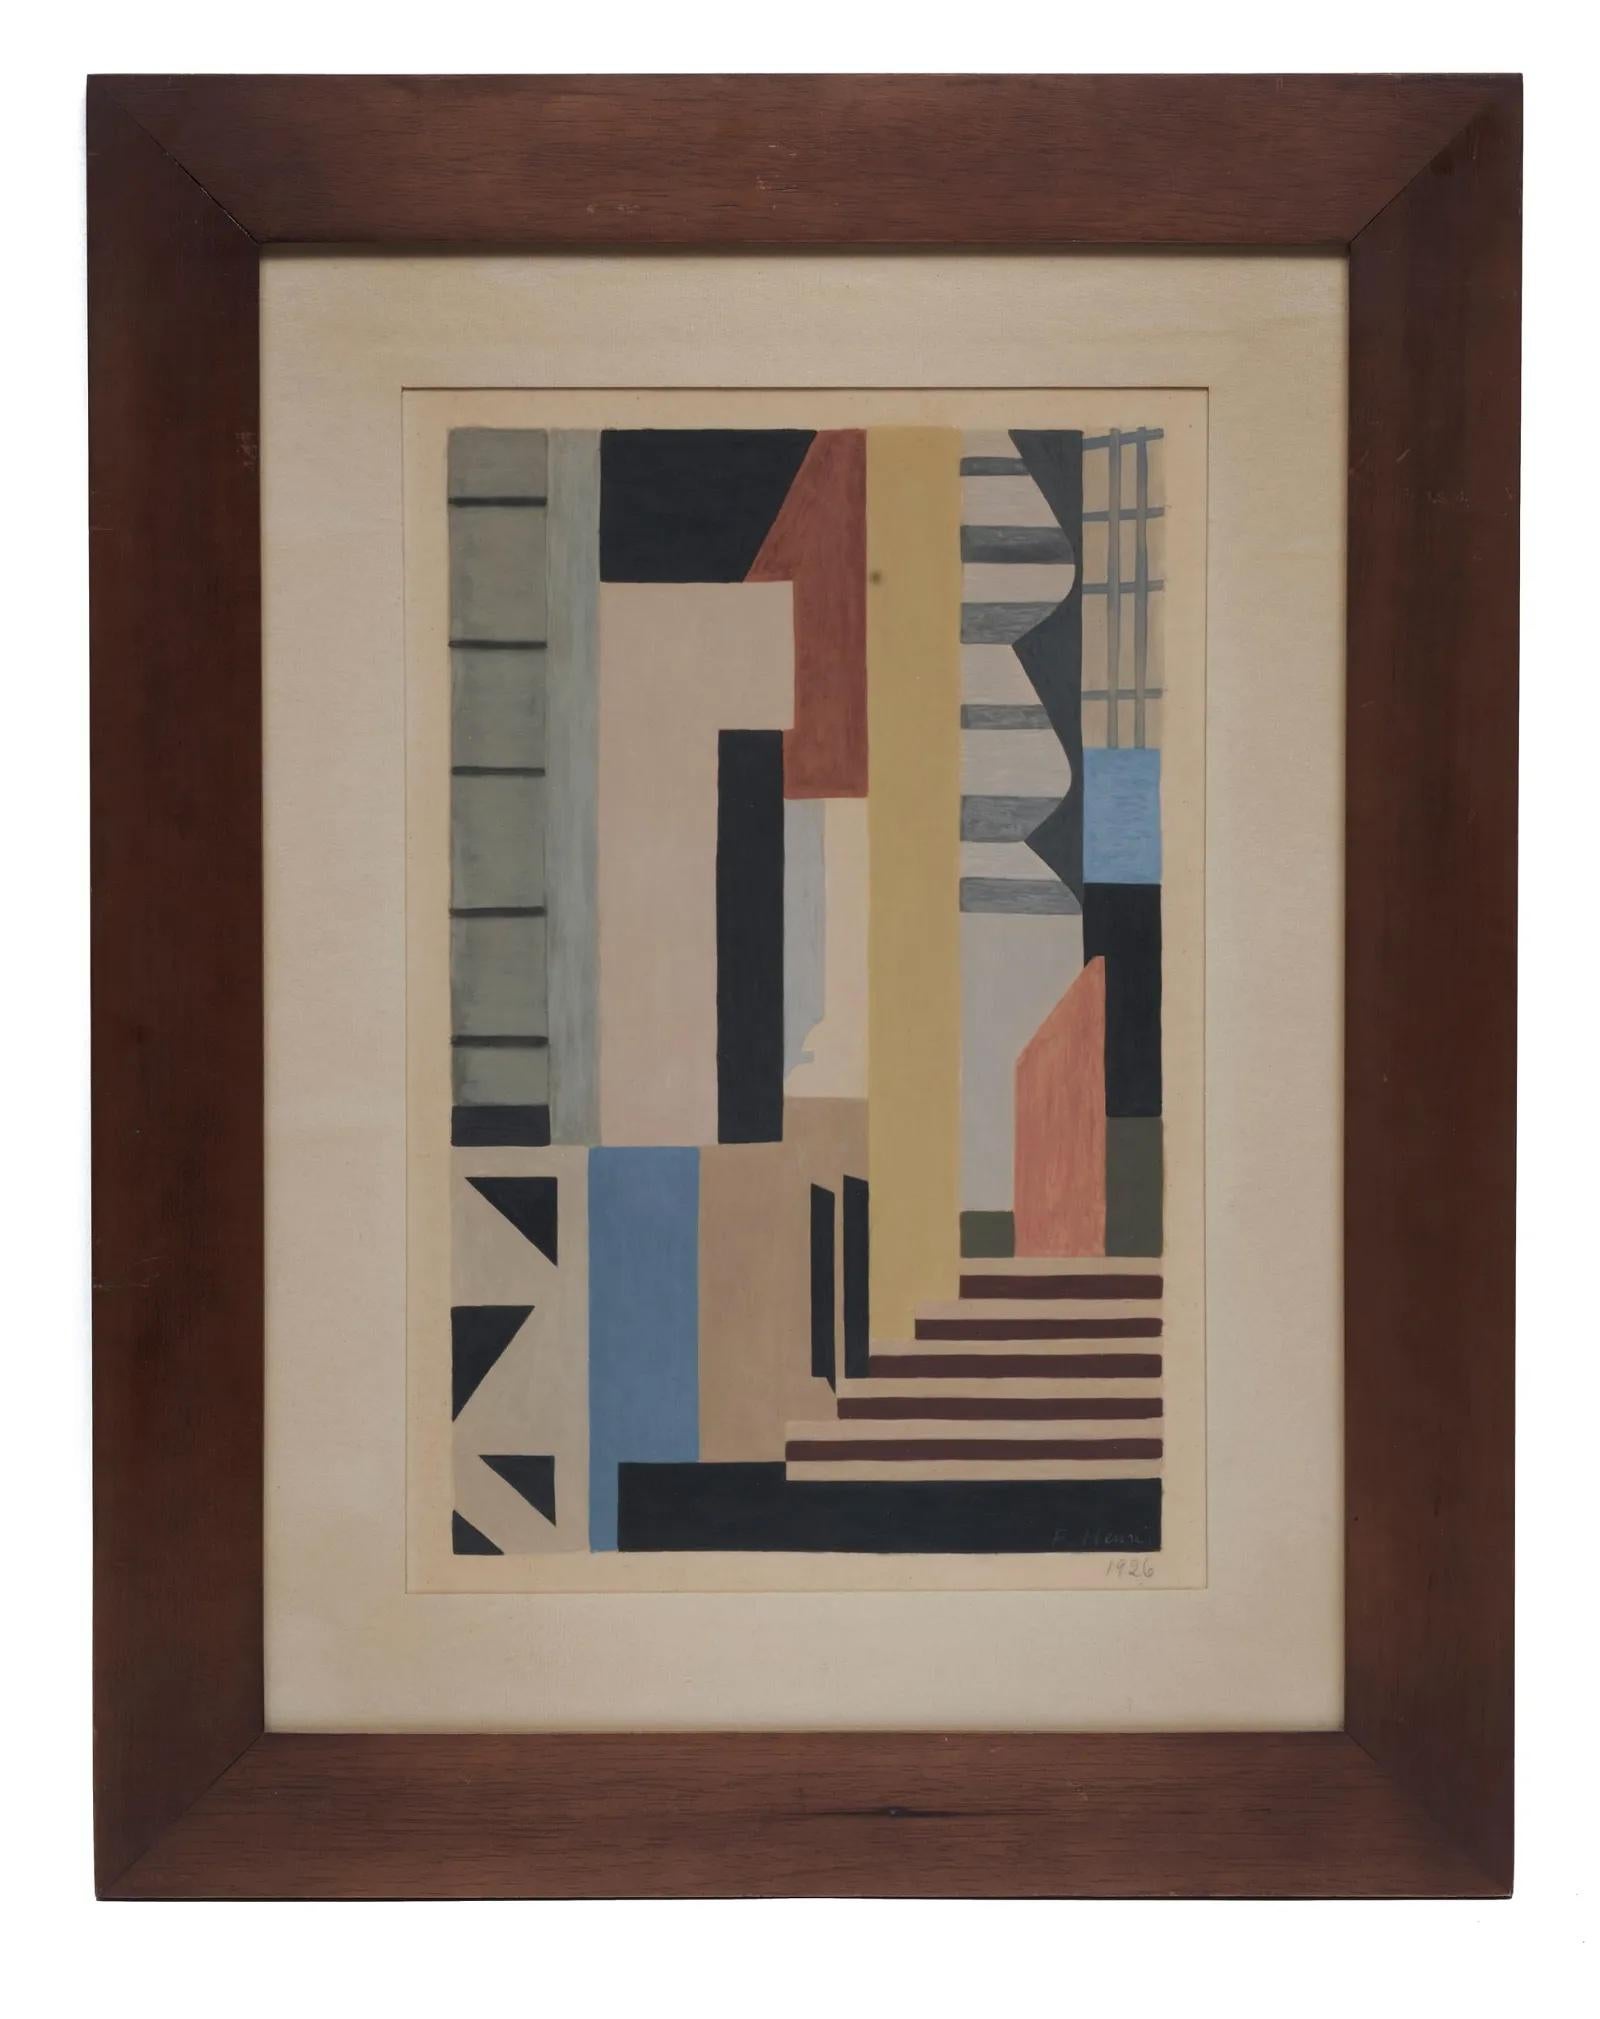 American Cubist Abstract Art Deco Avant-Garde Constructivism 20th Century Modern

Florence Henri (American, 1893-1982)
Composition
18 1/2 x 12 1/2 inches
Gouache on paper
Monogrammed F.H. and dated 1926 lower right
Framed: 28 1/4 x 22 1/4